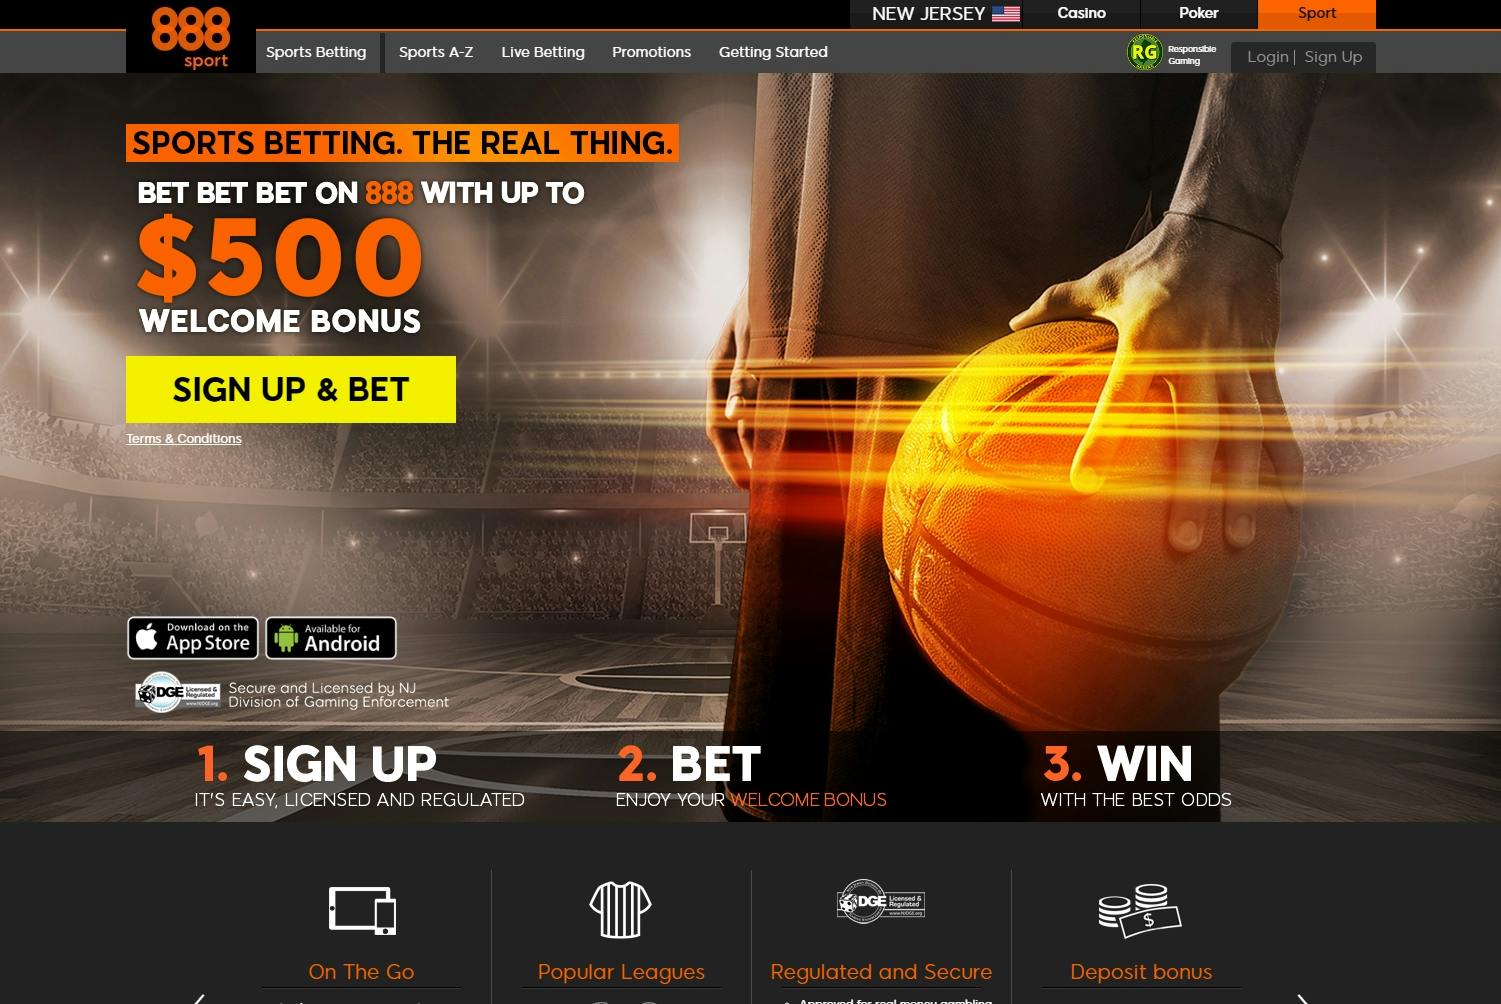 Top Uk Sports Betting Sites